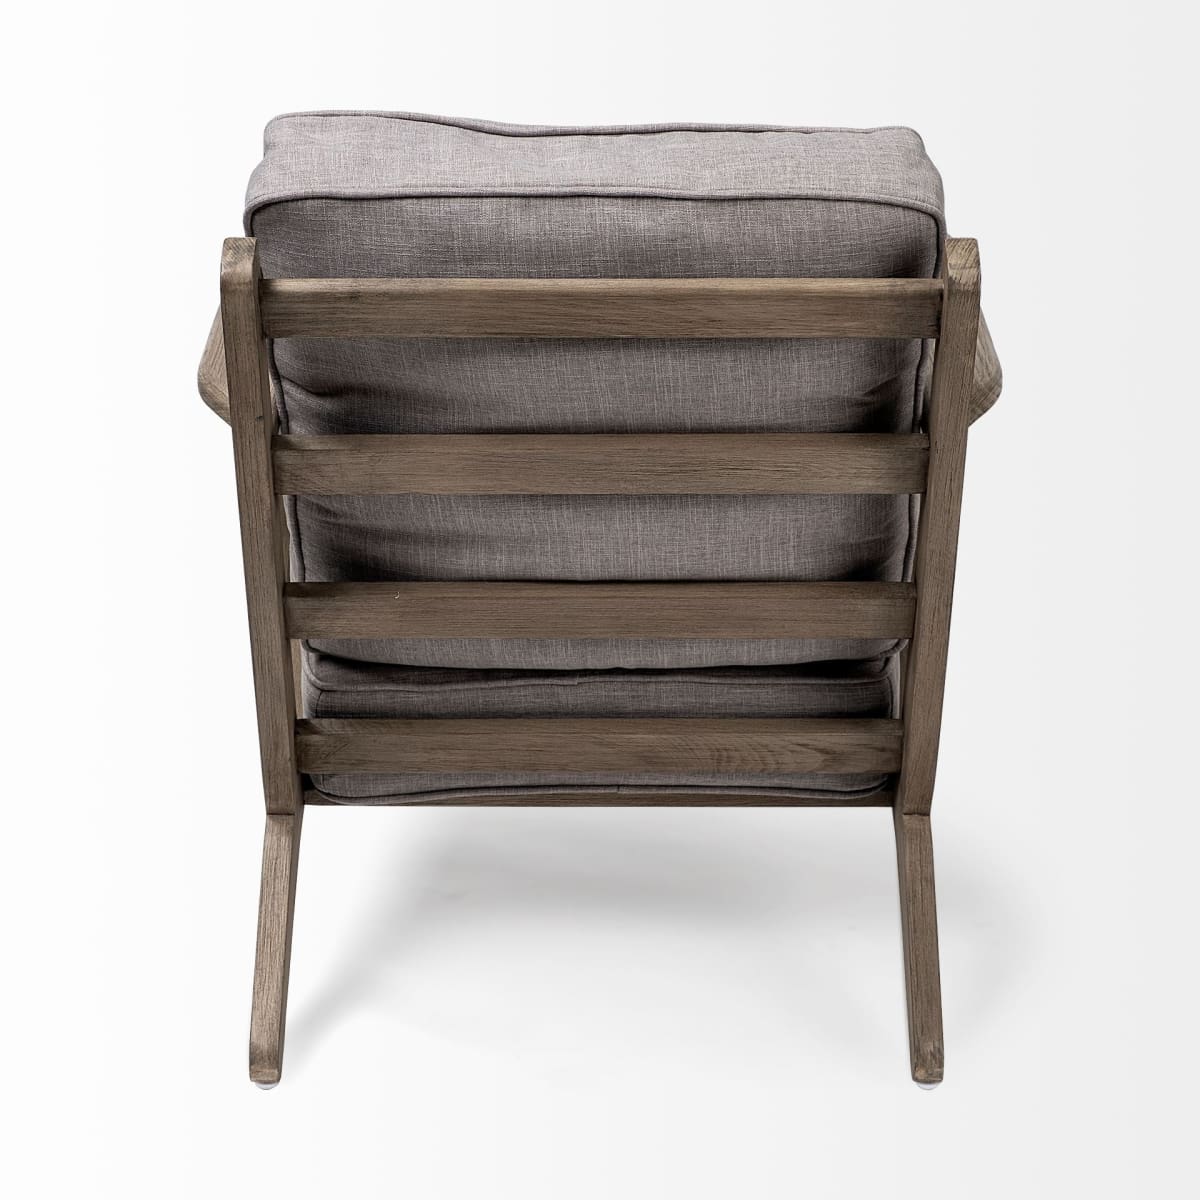 Olympus Accent Chair Flint Gray Fabric | Brown Wood - accent-chairs